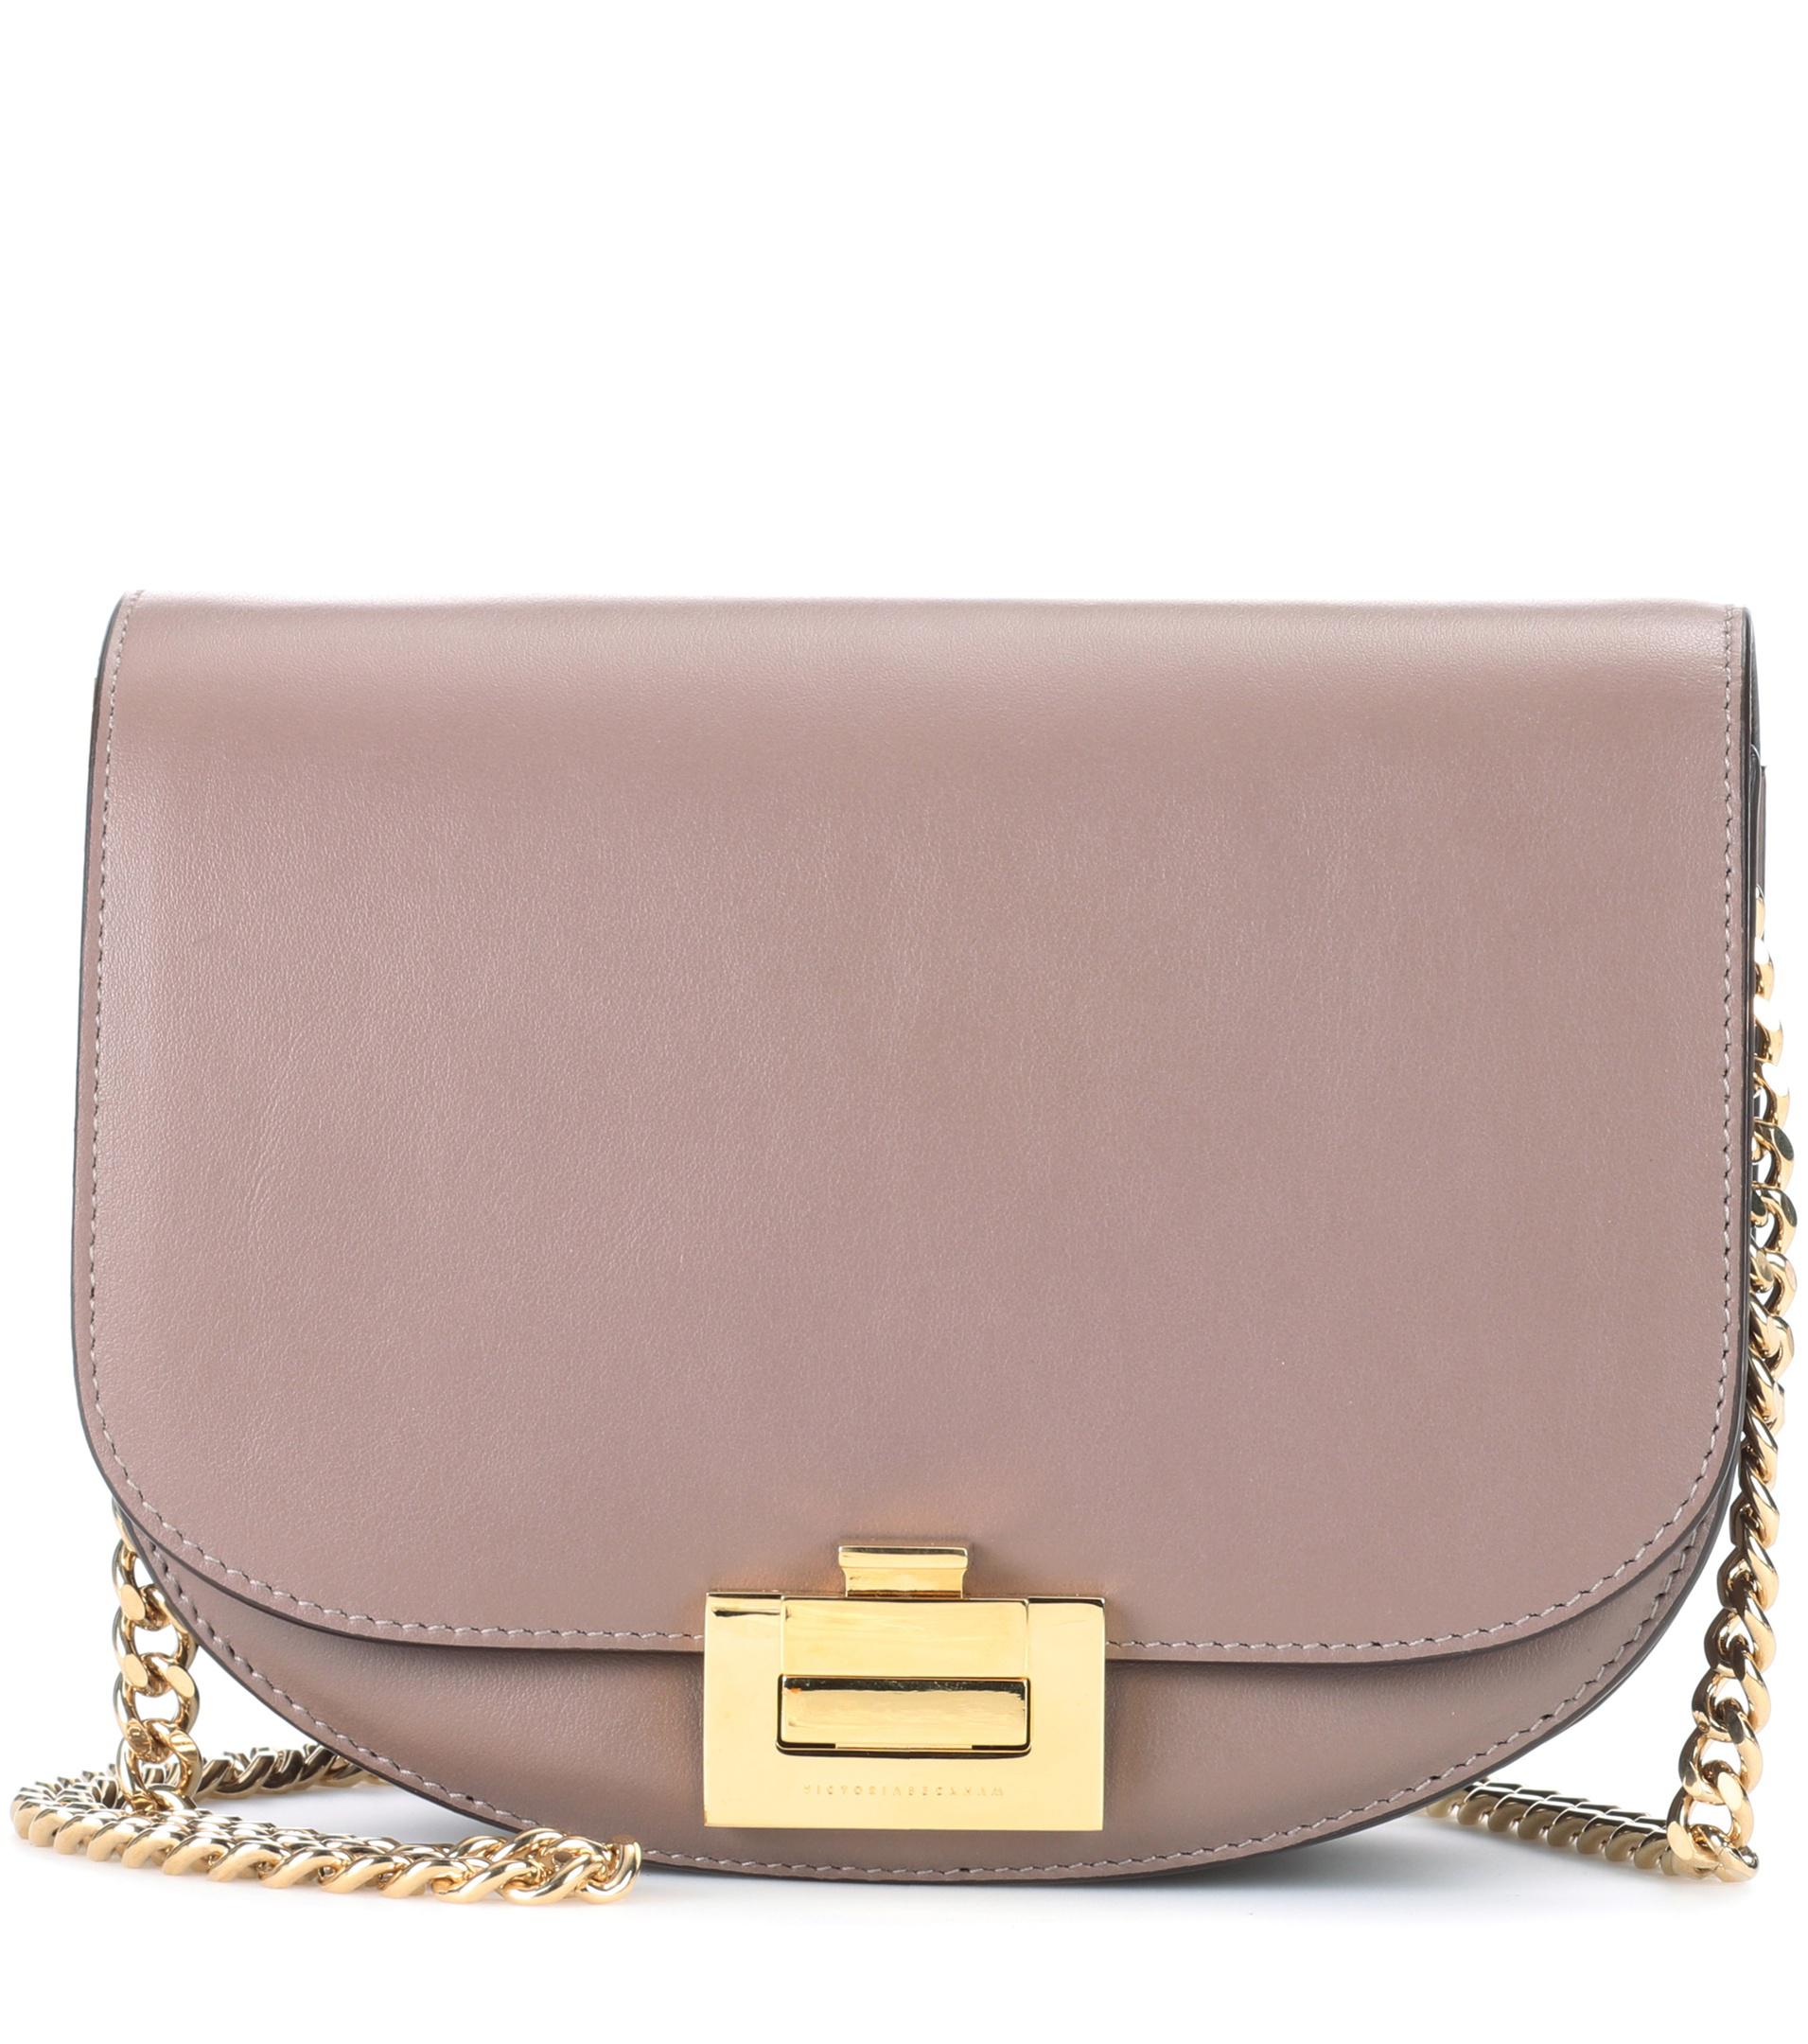 Victoria Beckham Box With Chain Leather Shoulder Bag in Grey (Gray) - Lyst